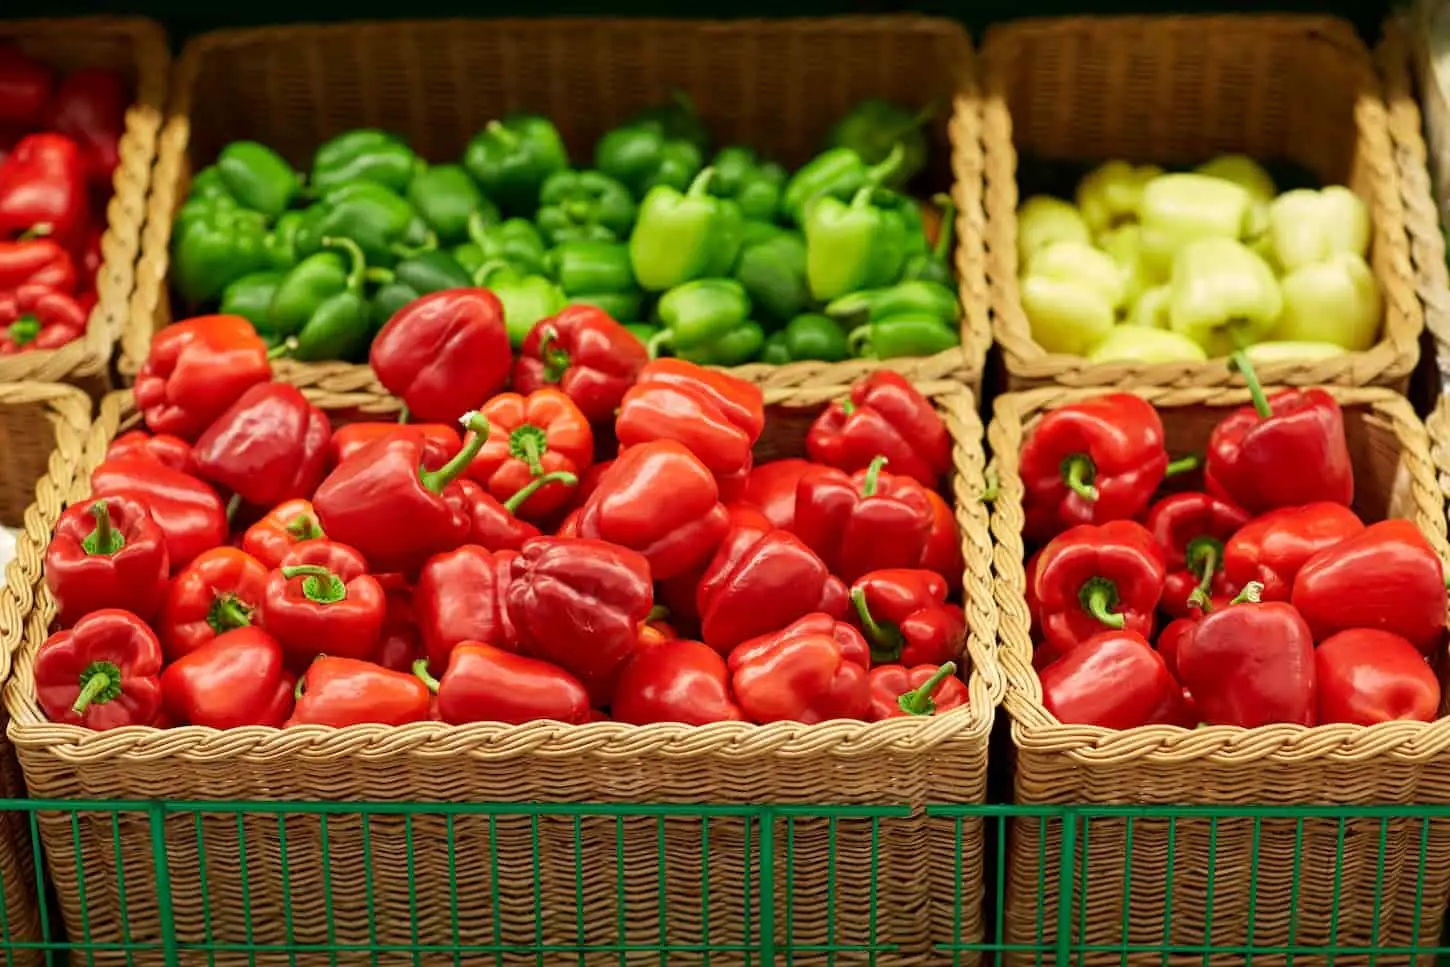 An image of bell peppers or paprika at a grocery store or market.